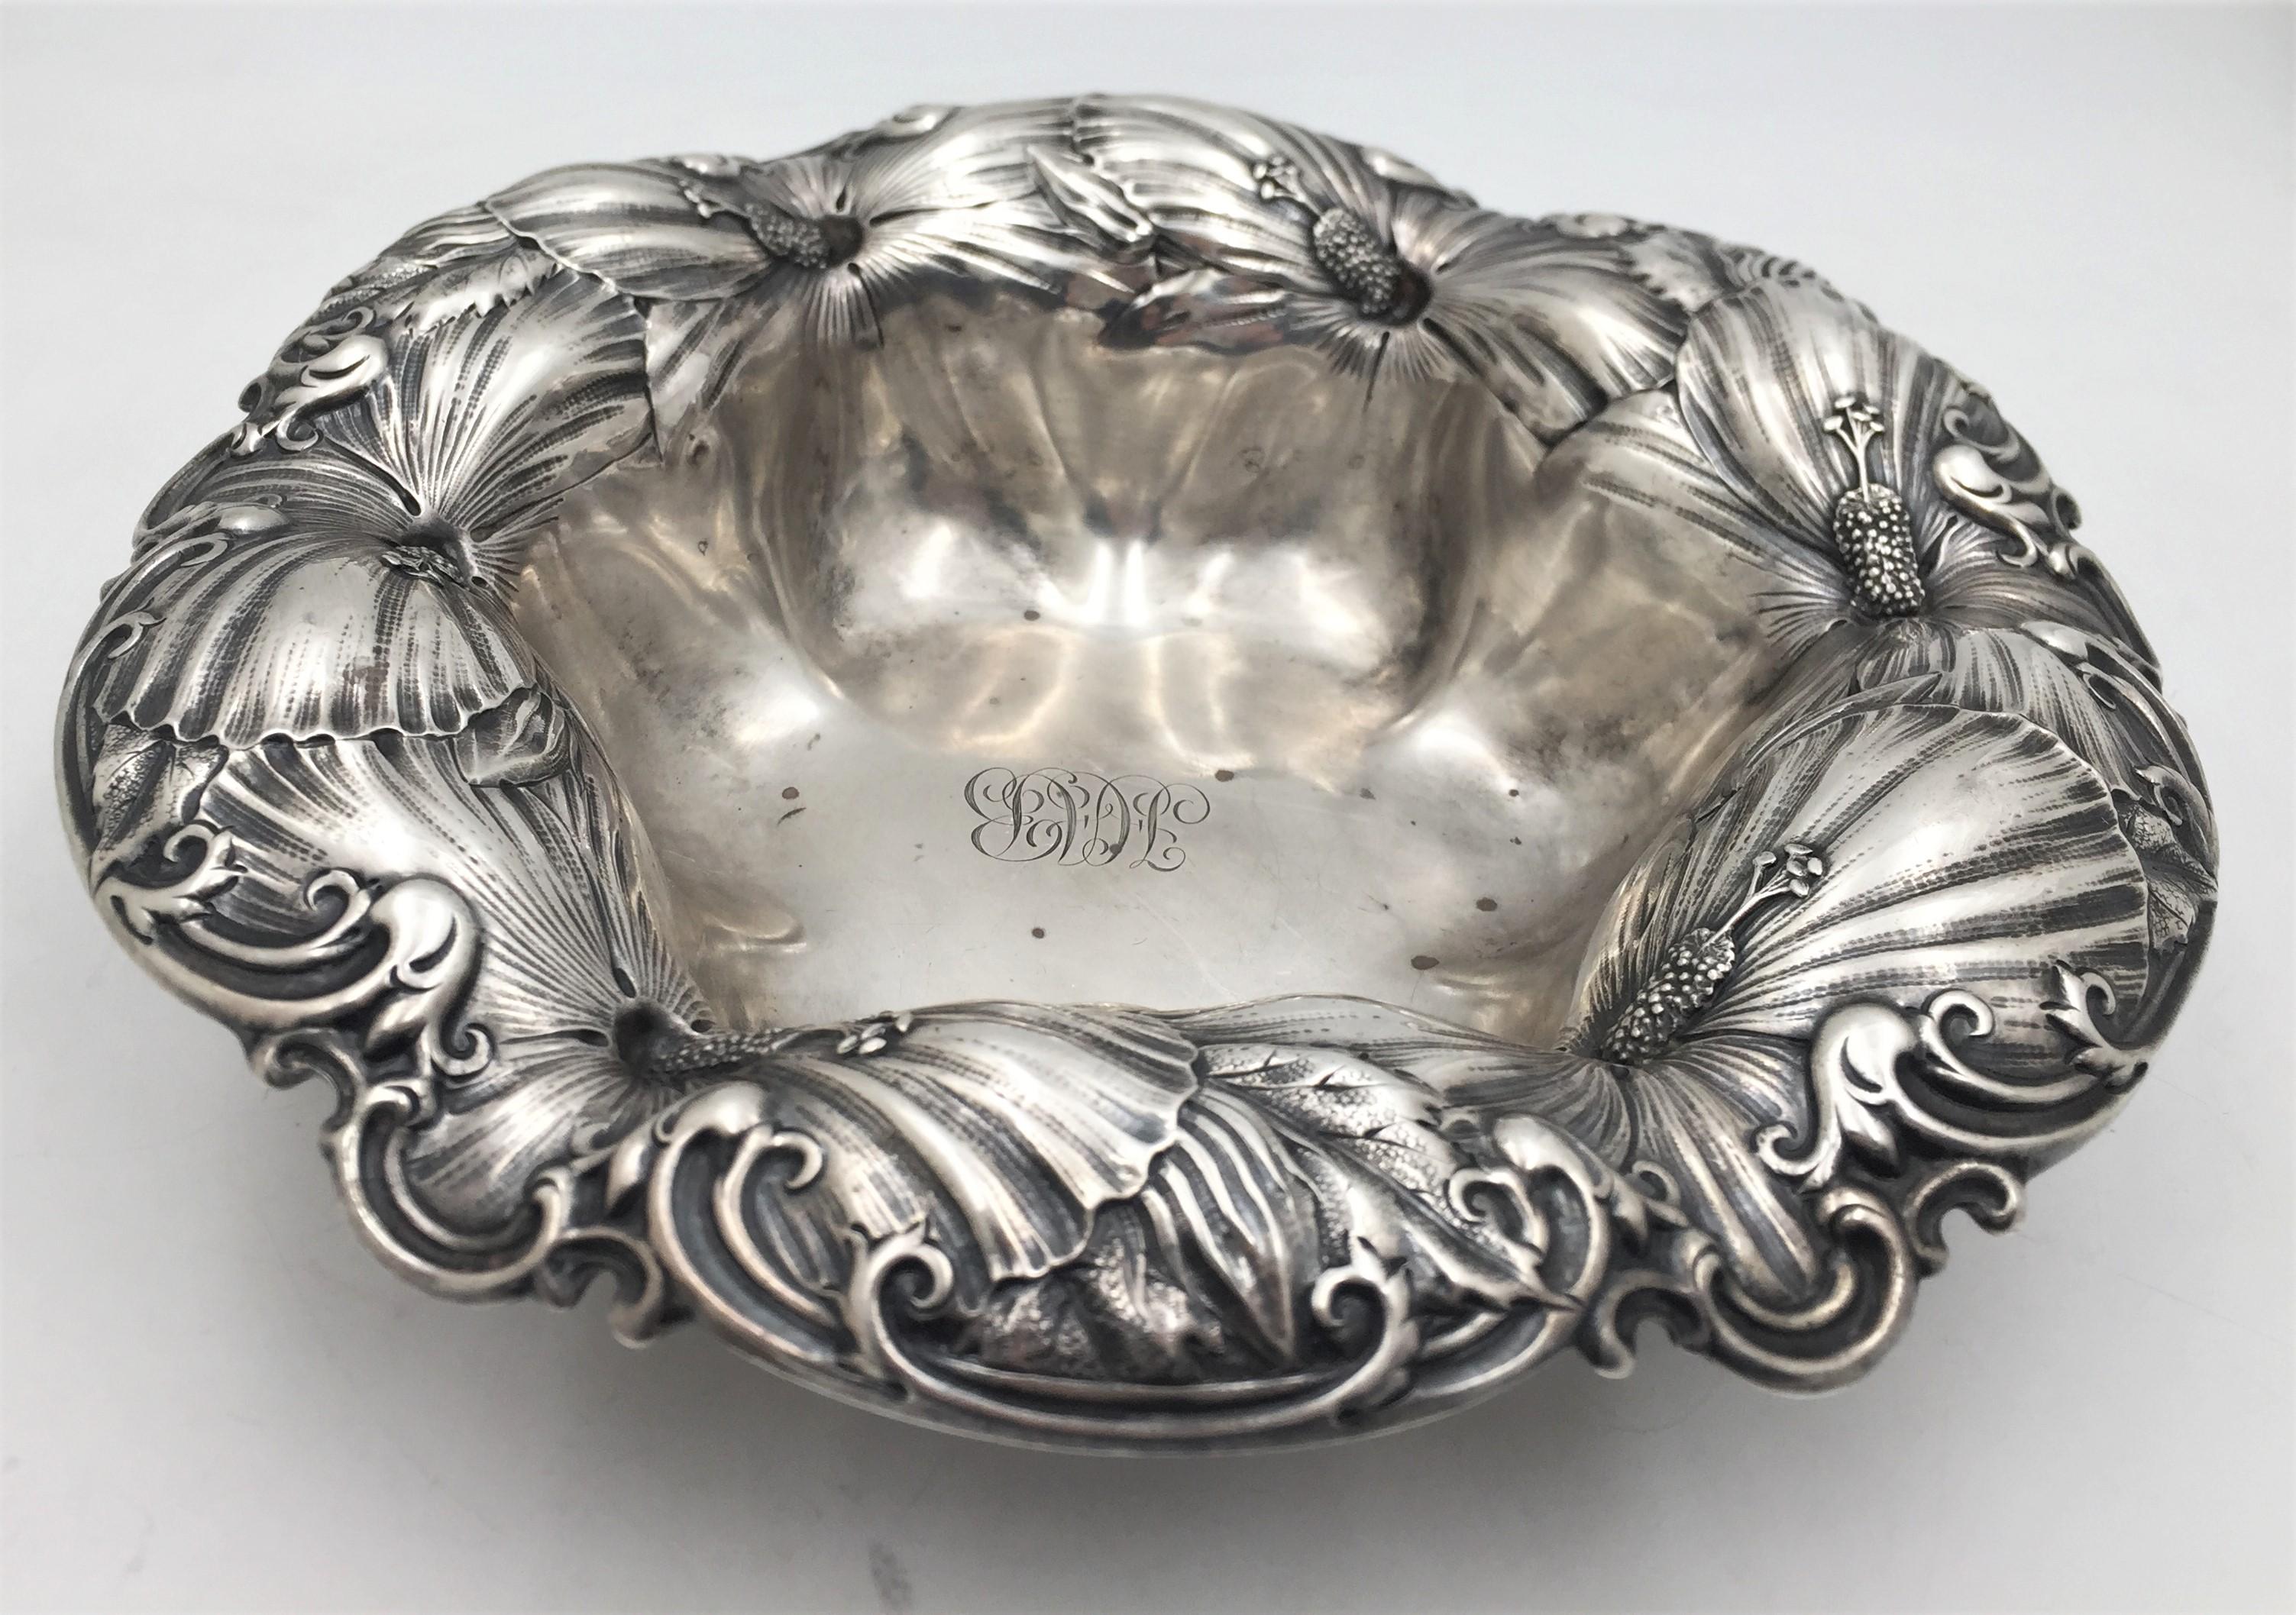 Whiting, sterling silver centerpiece or fruit bowl in Art Nouveau style, with beautiful, flowing floral motifs adorning the rim. It measures 12 1/2'' in diameter by 3 1/2'' in height, weighs 20.5 troy ounces, and bears hallmarks as shown.